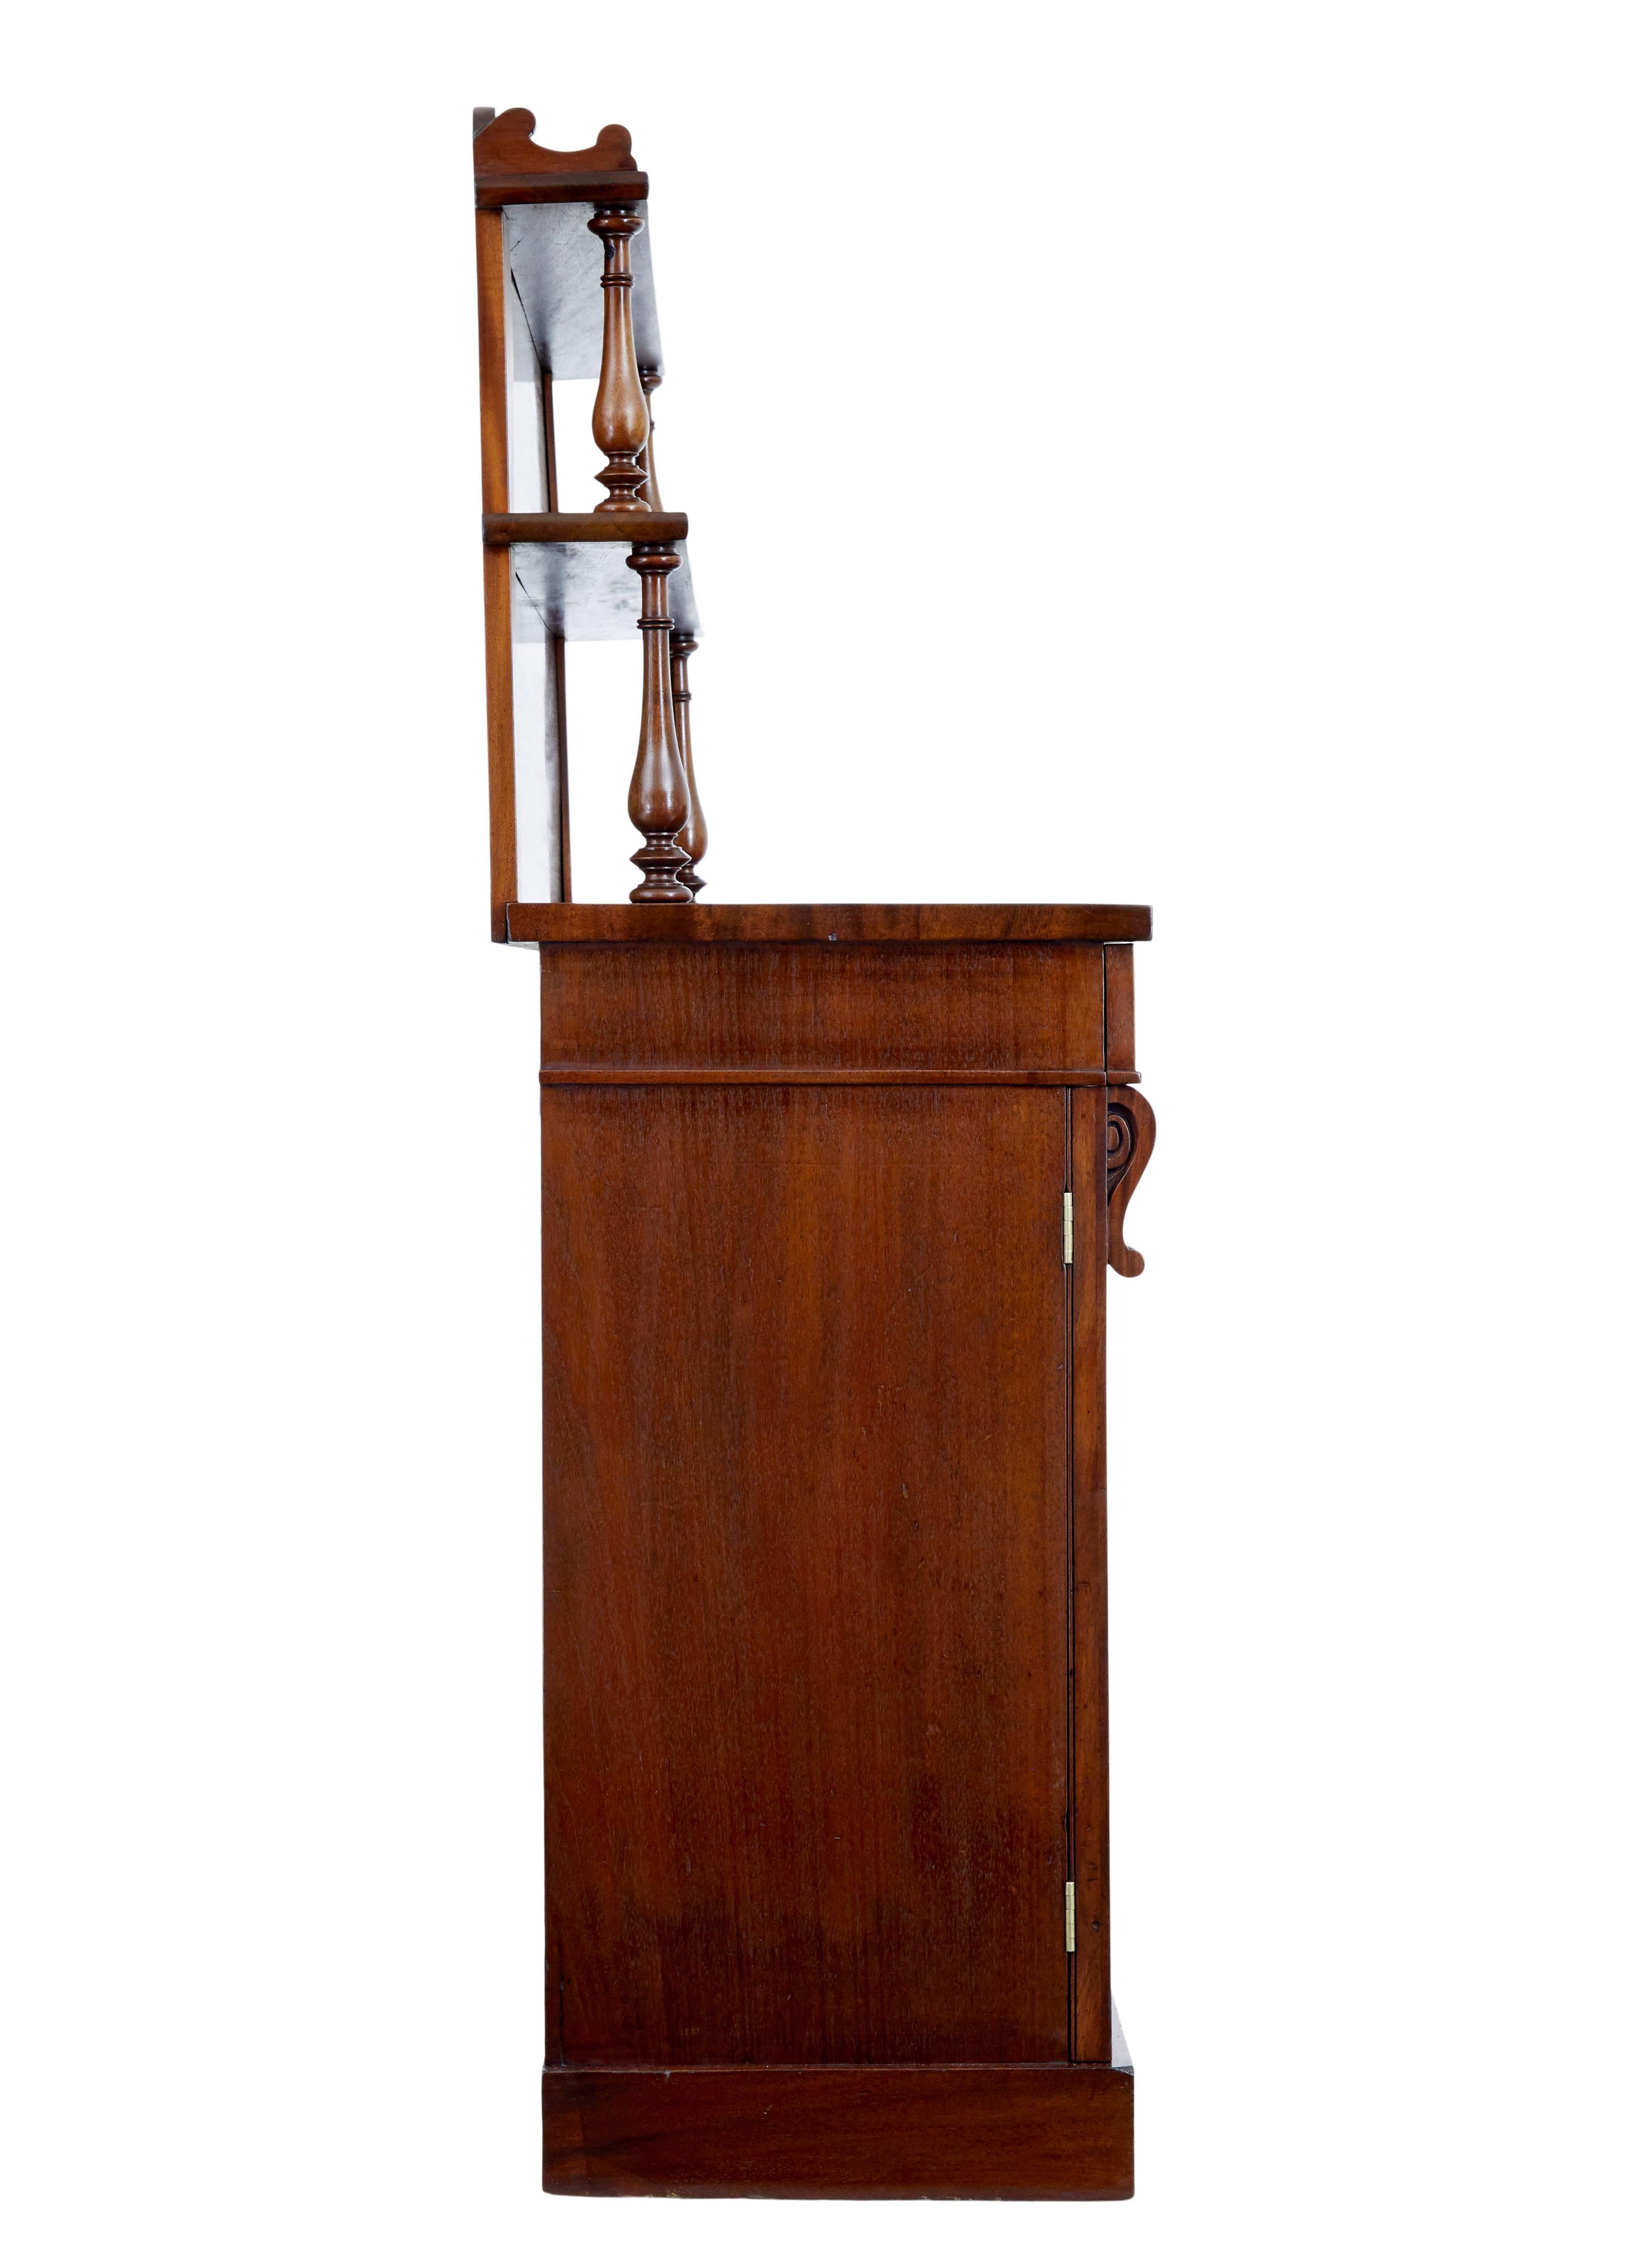 Turned 19th century French mahogany chiffonier sideboard For Sale